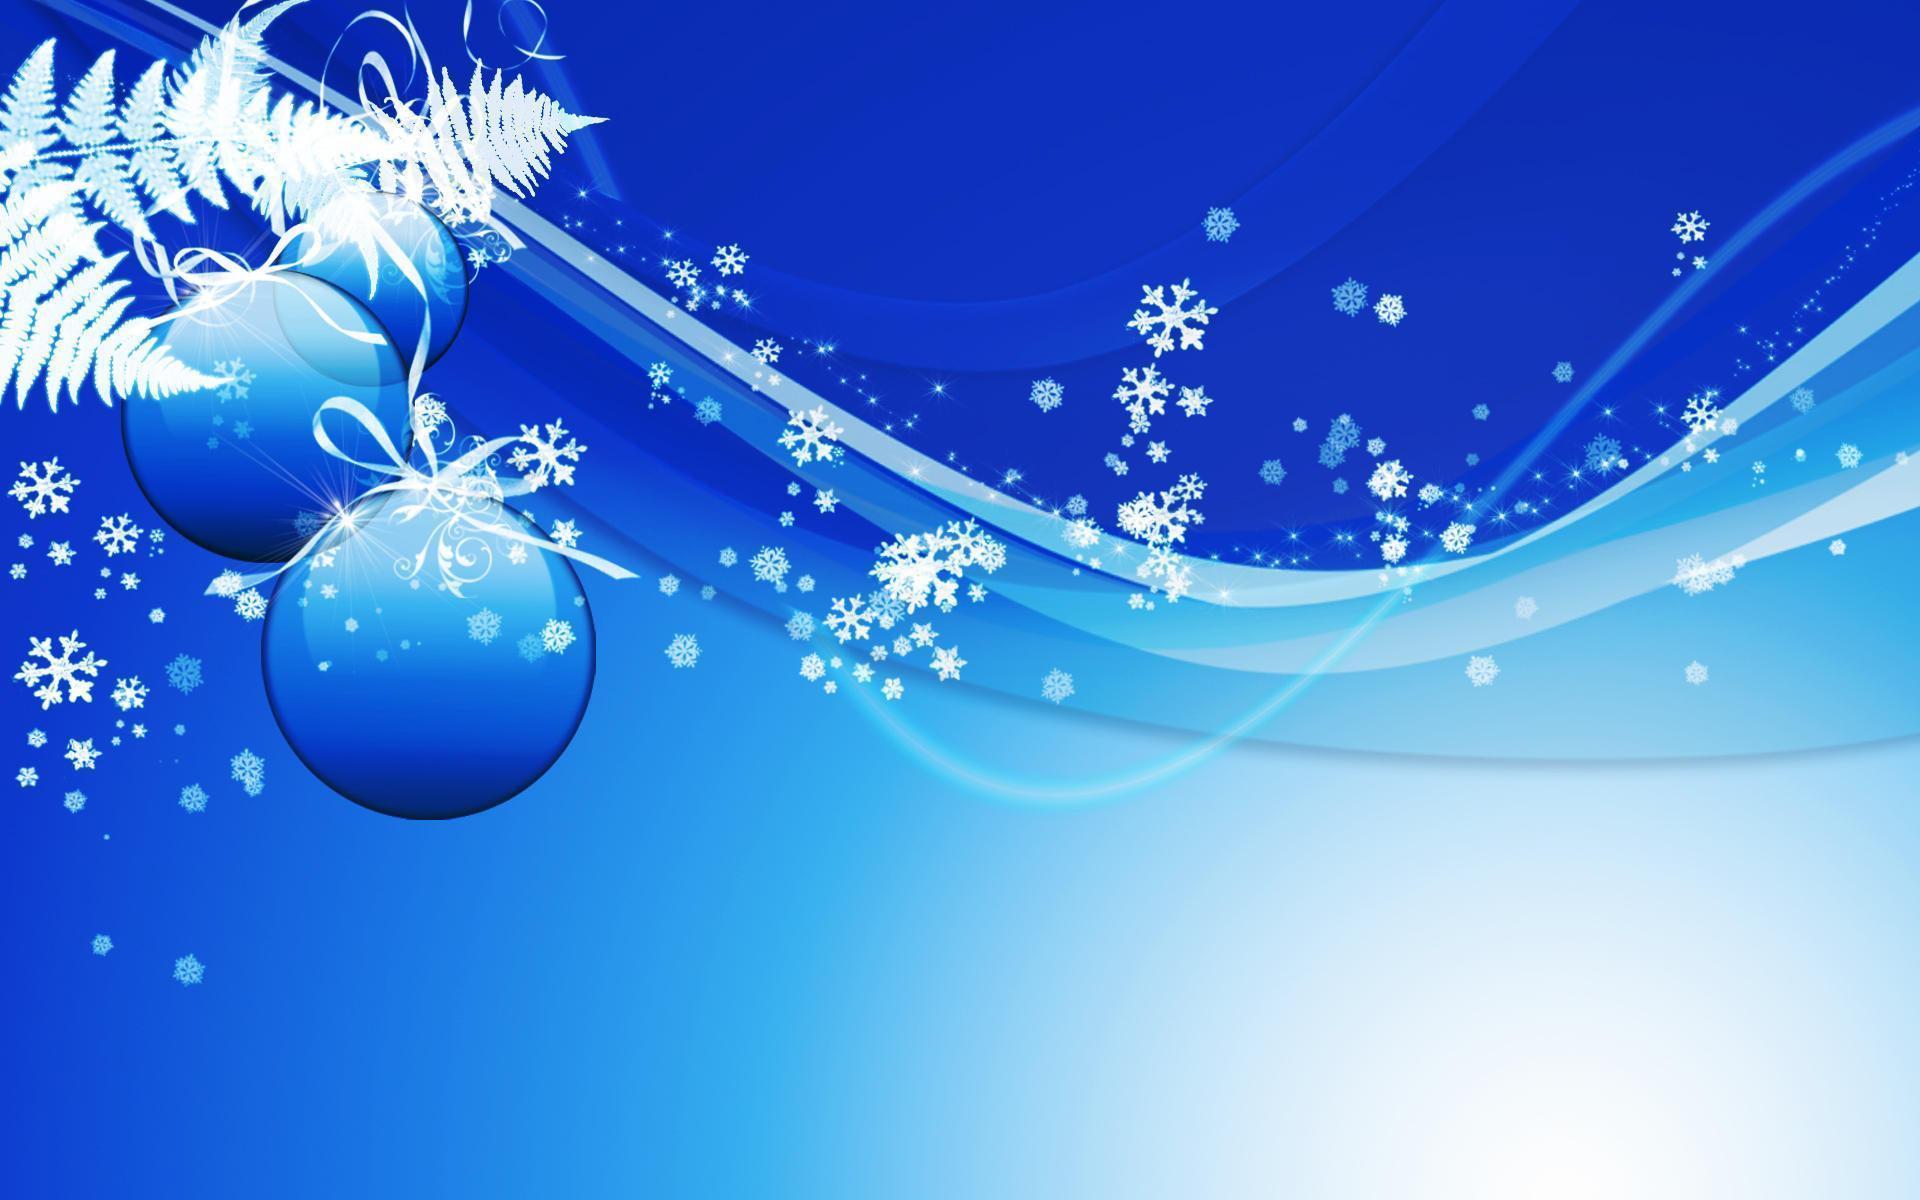 Holiday Backgrounds